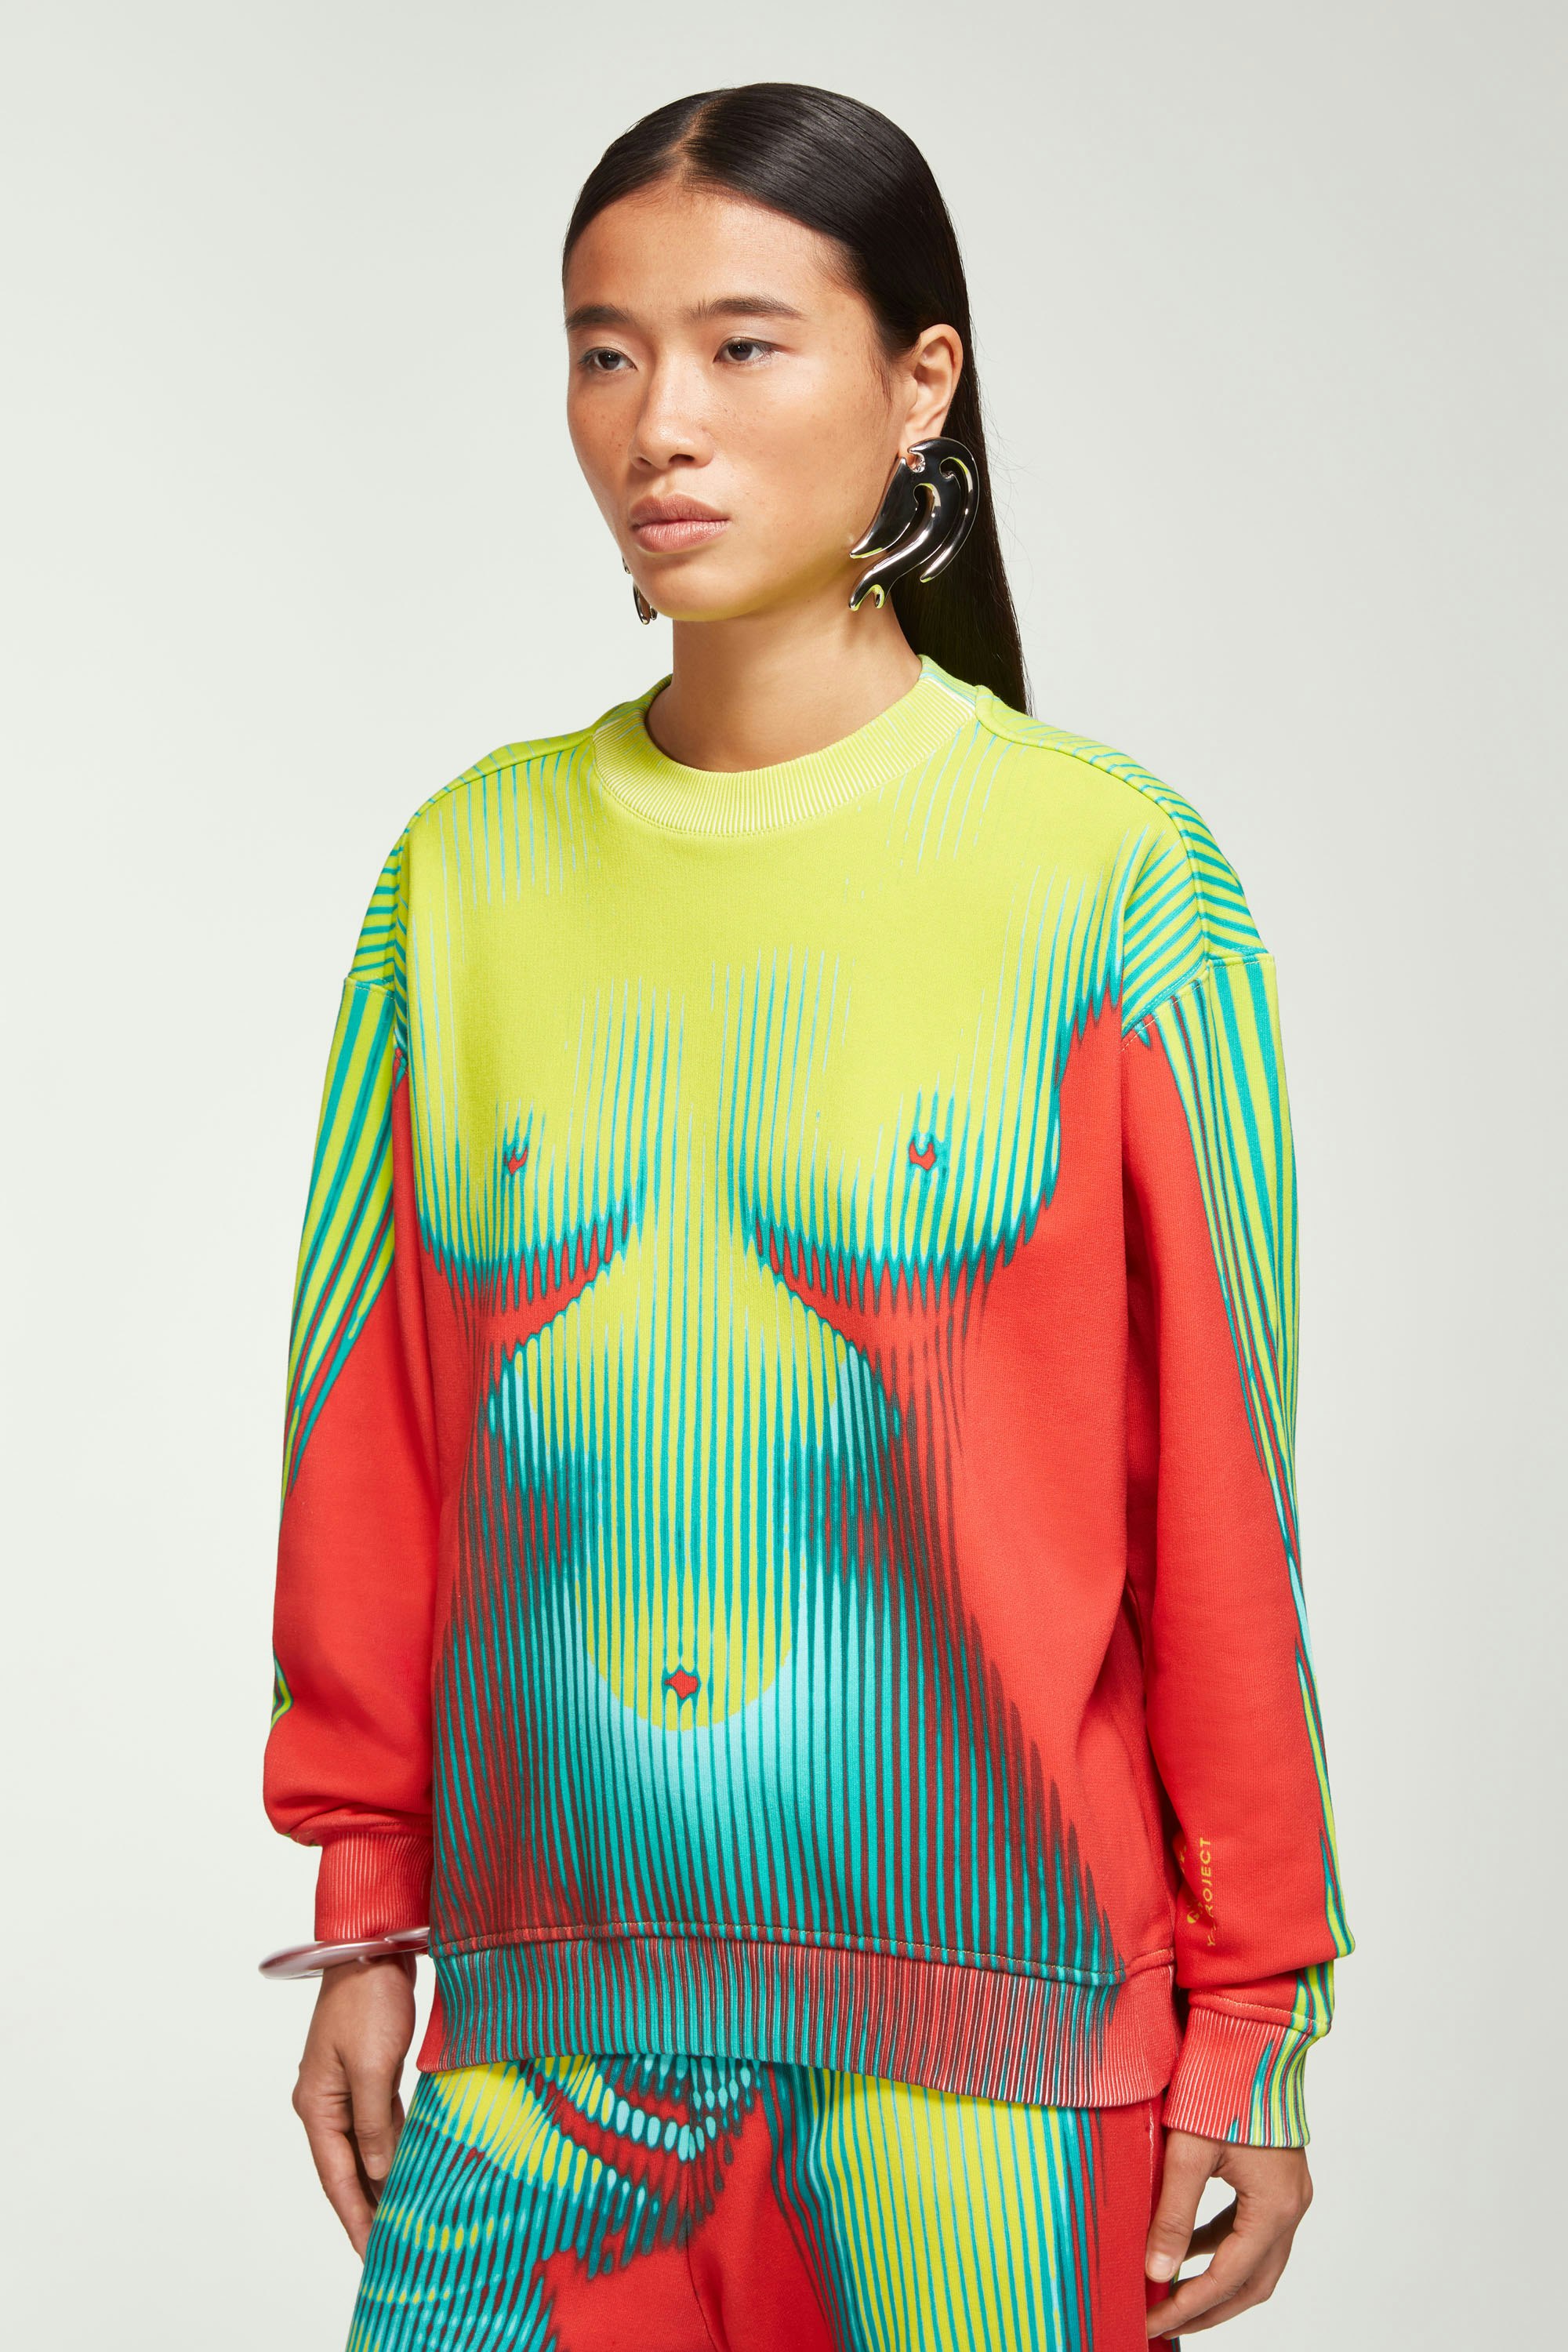 The Green & Red Body Morph Fitted Sweatshirt by Jean Paul Gaultier x Y/Project